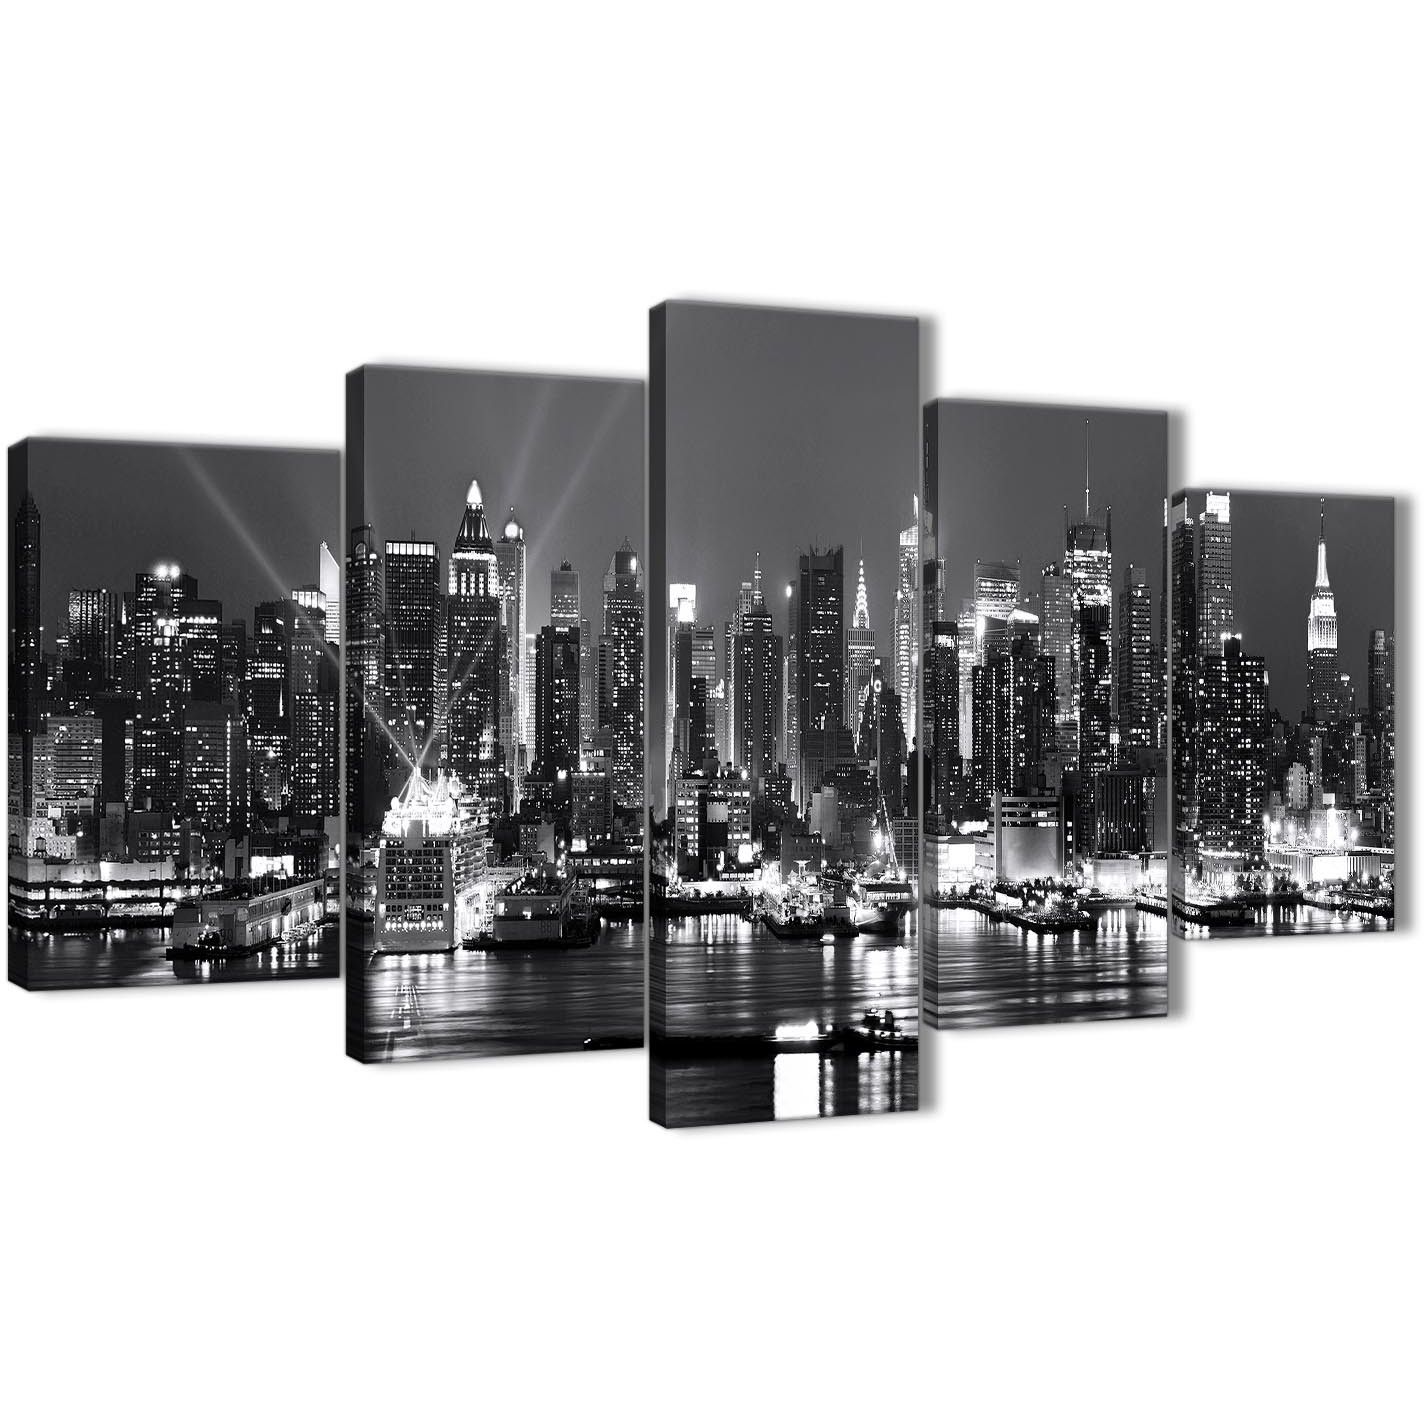 5 Panel Landscape Canvas Wall Art Prints – New York Hudson River Throughout New York Canvas Wall Art (View 20 of 20)